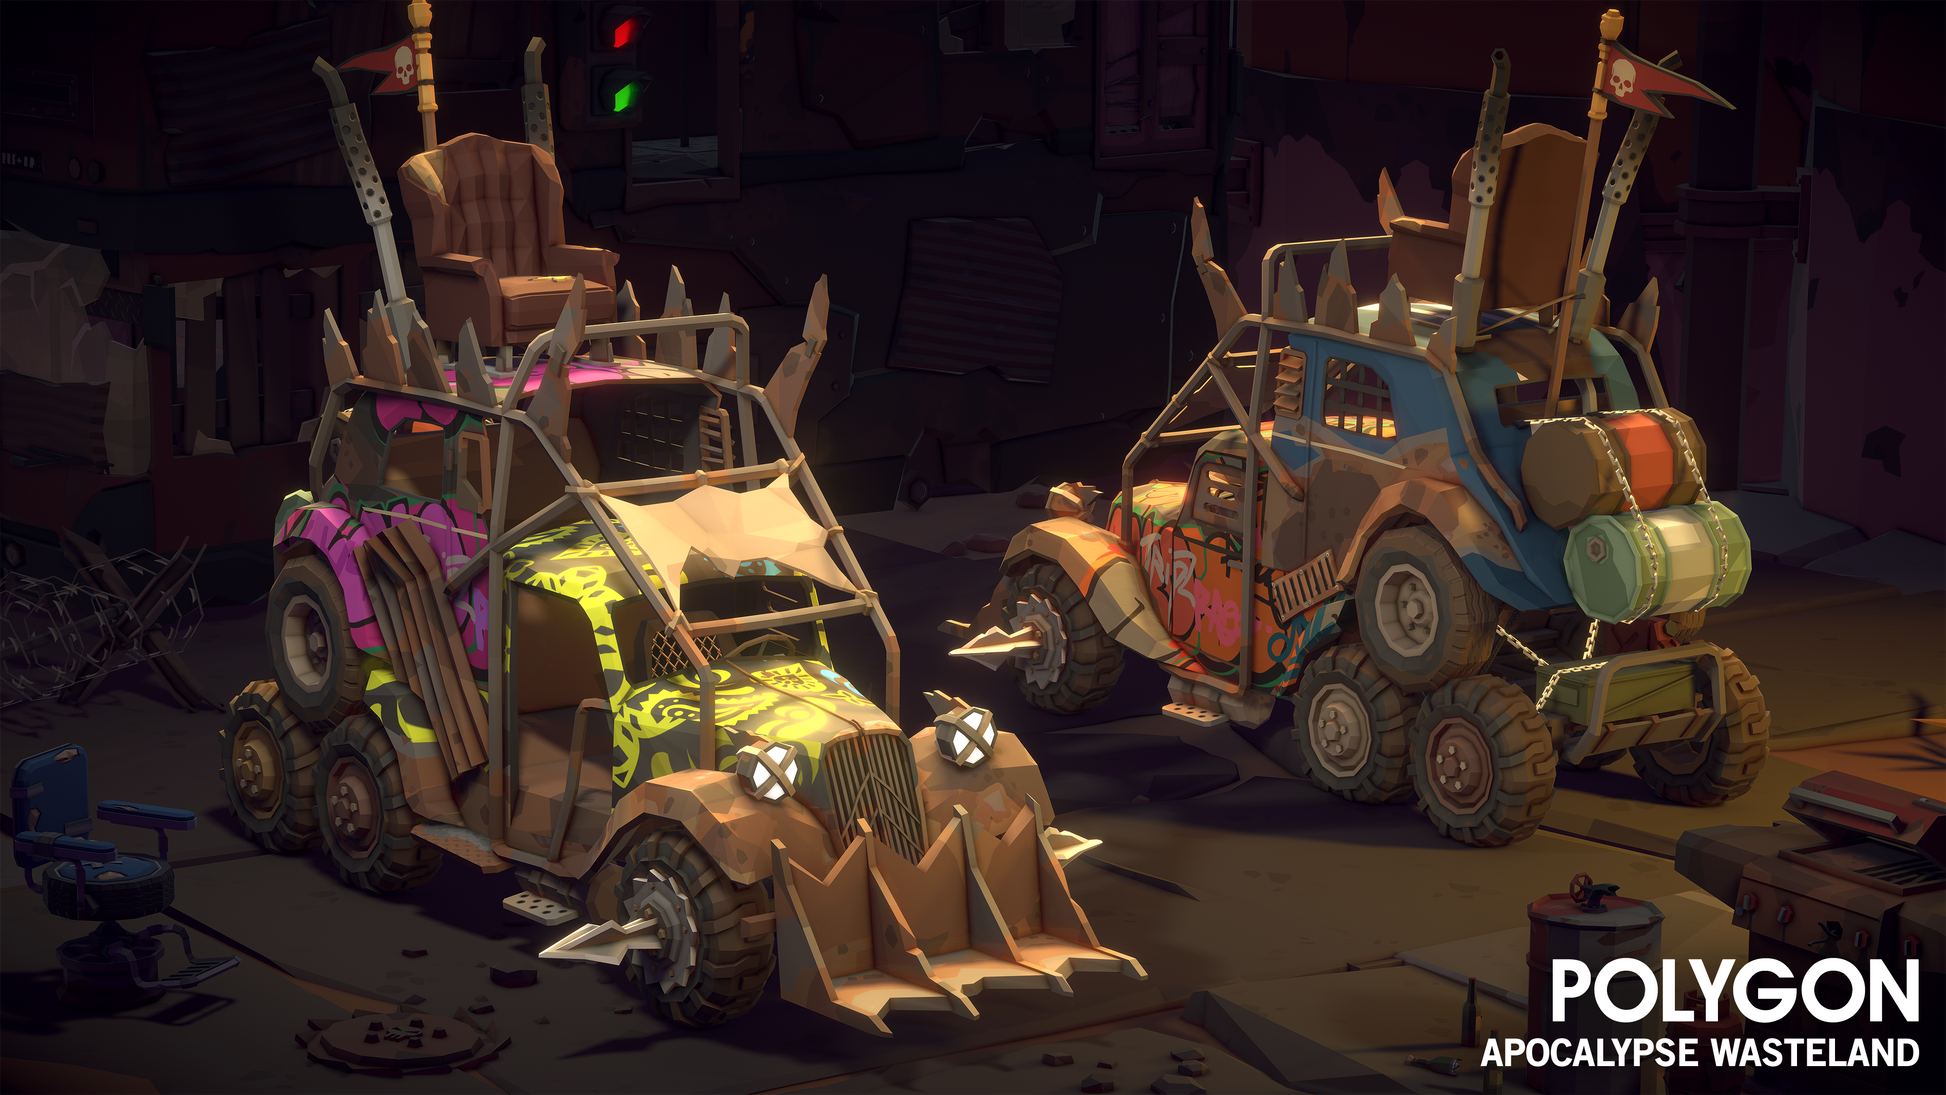 Two apocalyptic beach buggies made from various steel scrap and engine parts parked in a garage